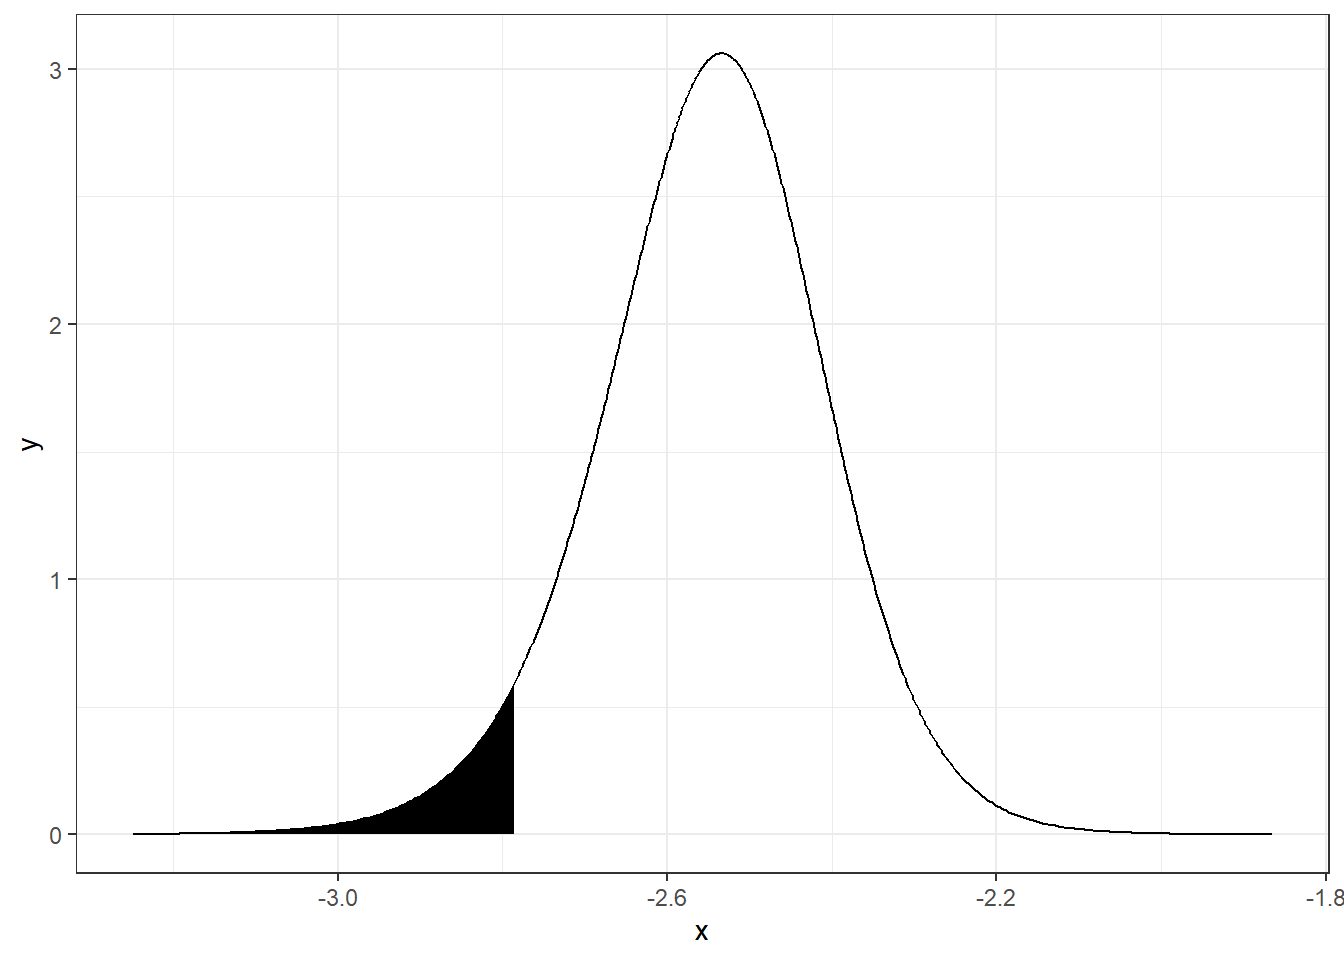 Probability of parameter $\alpha$ being lower than the 0.05 quantile.